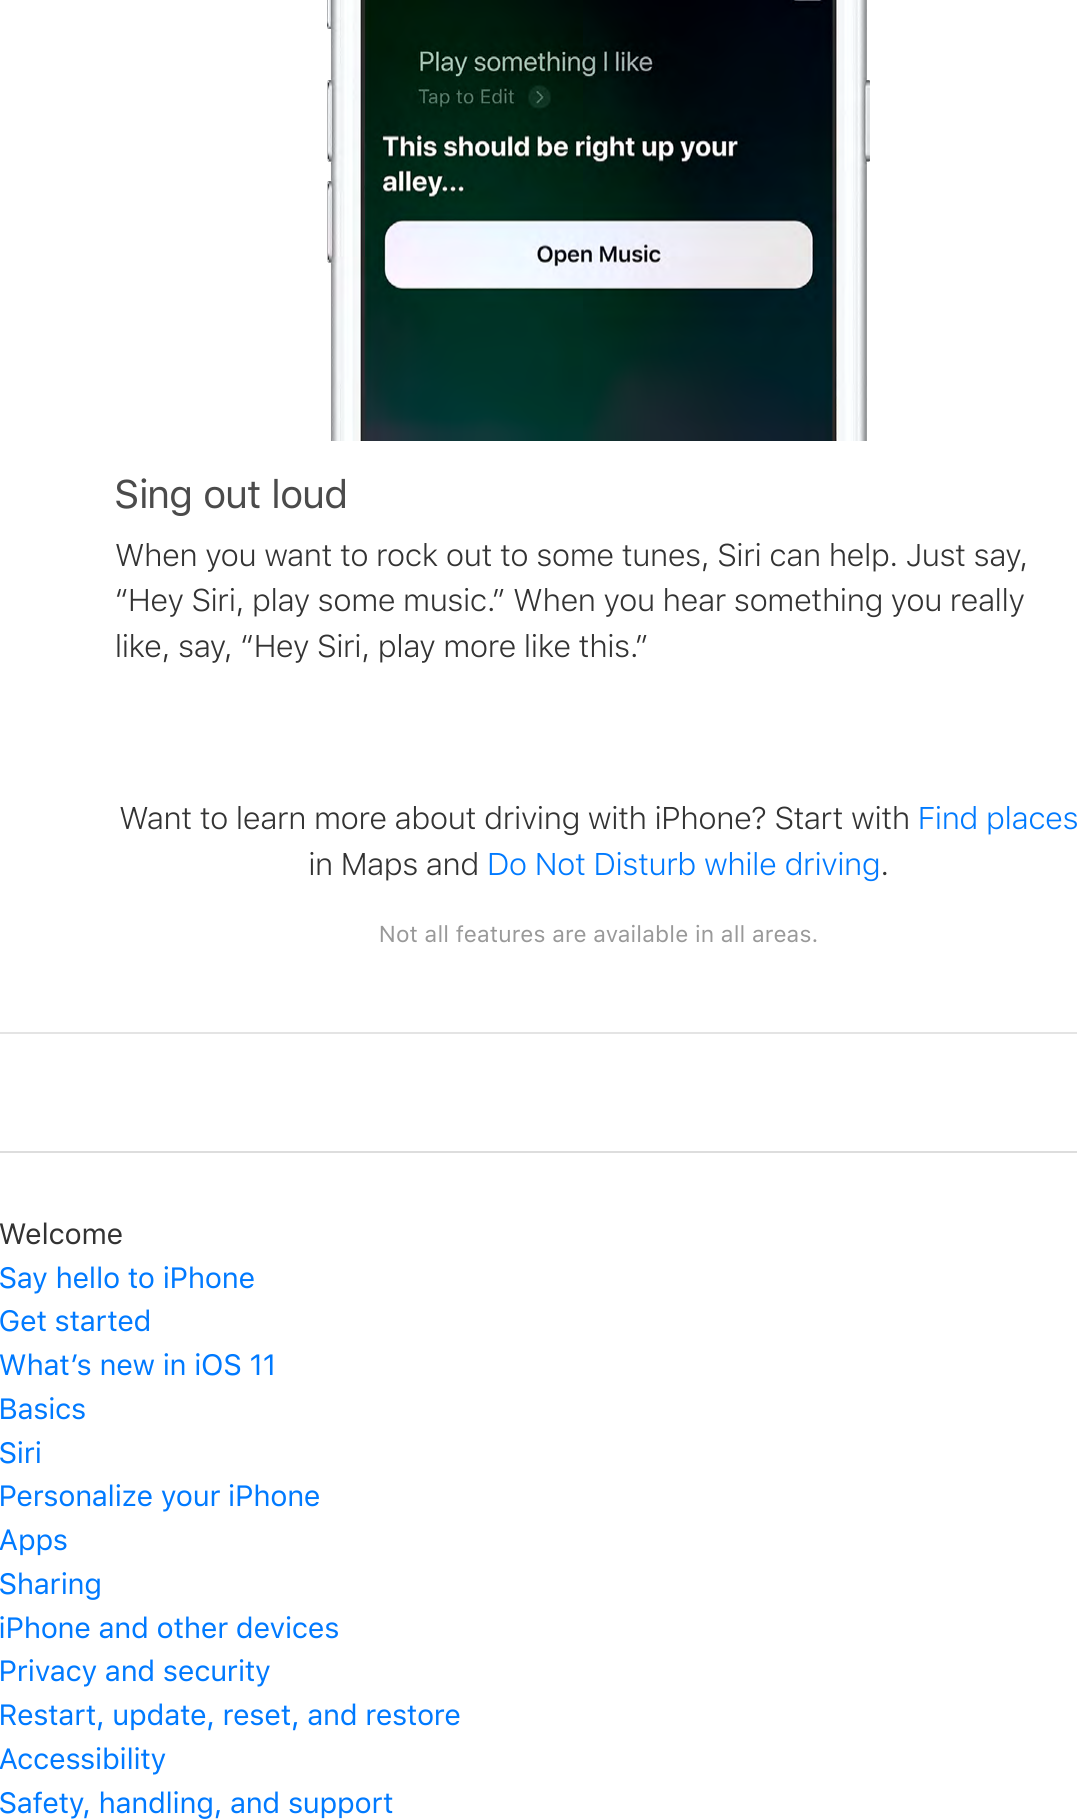 :!%4&apos;$6*&apos;.$6CWhen you want to rock out to some tunes, Siri can help. Just say,“Hey Siri, play some music.” When you hear something you reallylike, say, “Hey Siri, play more like this.”Want to learn more about driving with iPhone? Start with in Maps and  .E$*&apos;-..&apos;7&amp;-*60&amp;,&apos;-0&amp;&apos;-A-!.-F.&amp;&apos;!%&apos;-..&apos;-0&amp;-,GFind placesDo Not Disturb while drivingL&amp;./$9&amp;:-&gt;&apos;#&amp;..$&apos;*$&apos;!&quot;#$%&amp;M&amp;*&apos;,*-0*&amp;CL#-*+,&apos;%&amp;3&apos;!%&apos;!N:&apos;OOP-,!/,:!0!&quot;&amp;0,$%-.!@&amp;&apos;&gt;$60&apos;!&quot;#$%&amp;B;;,:#-0!%4!&quot;#$%&amp;&apos;-%C&apos;$*#&amp;0&apos;C&amp;A!/&amp;,&quot;0!A-/&gt;&apos;-%C&apos;,&amp;/60!*&gt;I&amp;,*-0*Q&apos;6;C-*&amp;Q&apos;0&amp;,&amp;*Q&apos;-%C&apos;0&amp;,*$0&amp;B//&amp;,,!F!.!*&gt;:-7&amp;*&gt;Q&apos;#-%C.!%4Q&apos;-%C&apos;,6;;$0*